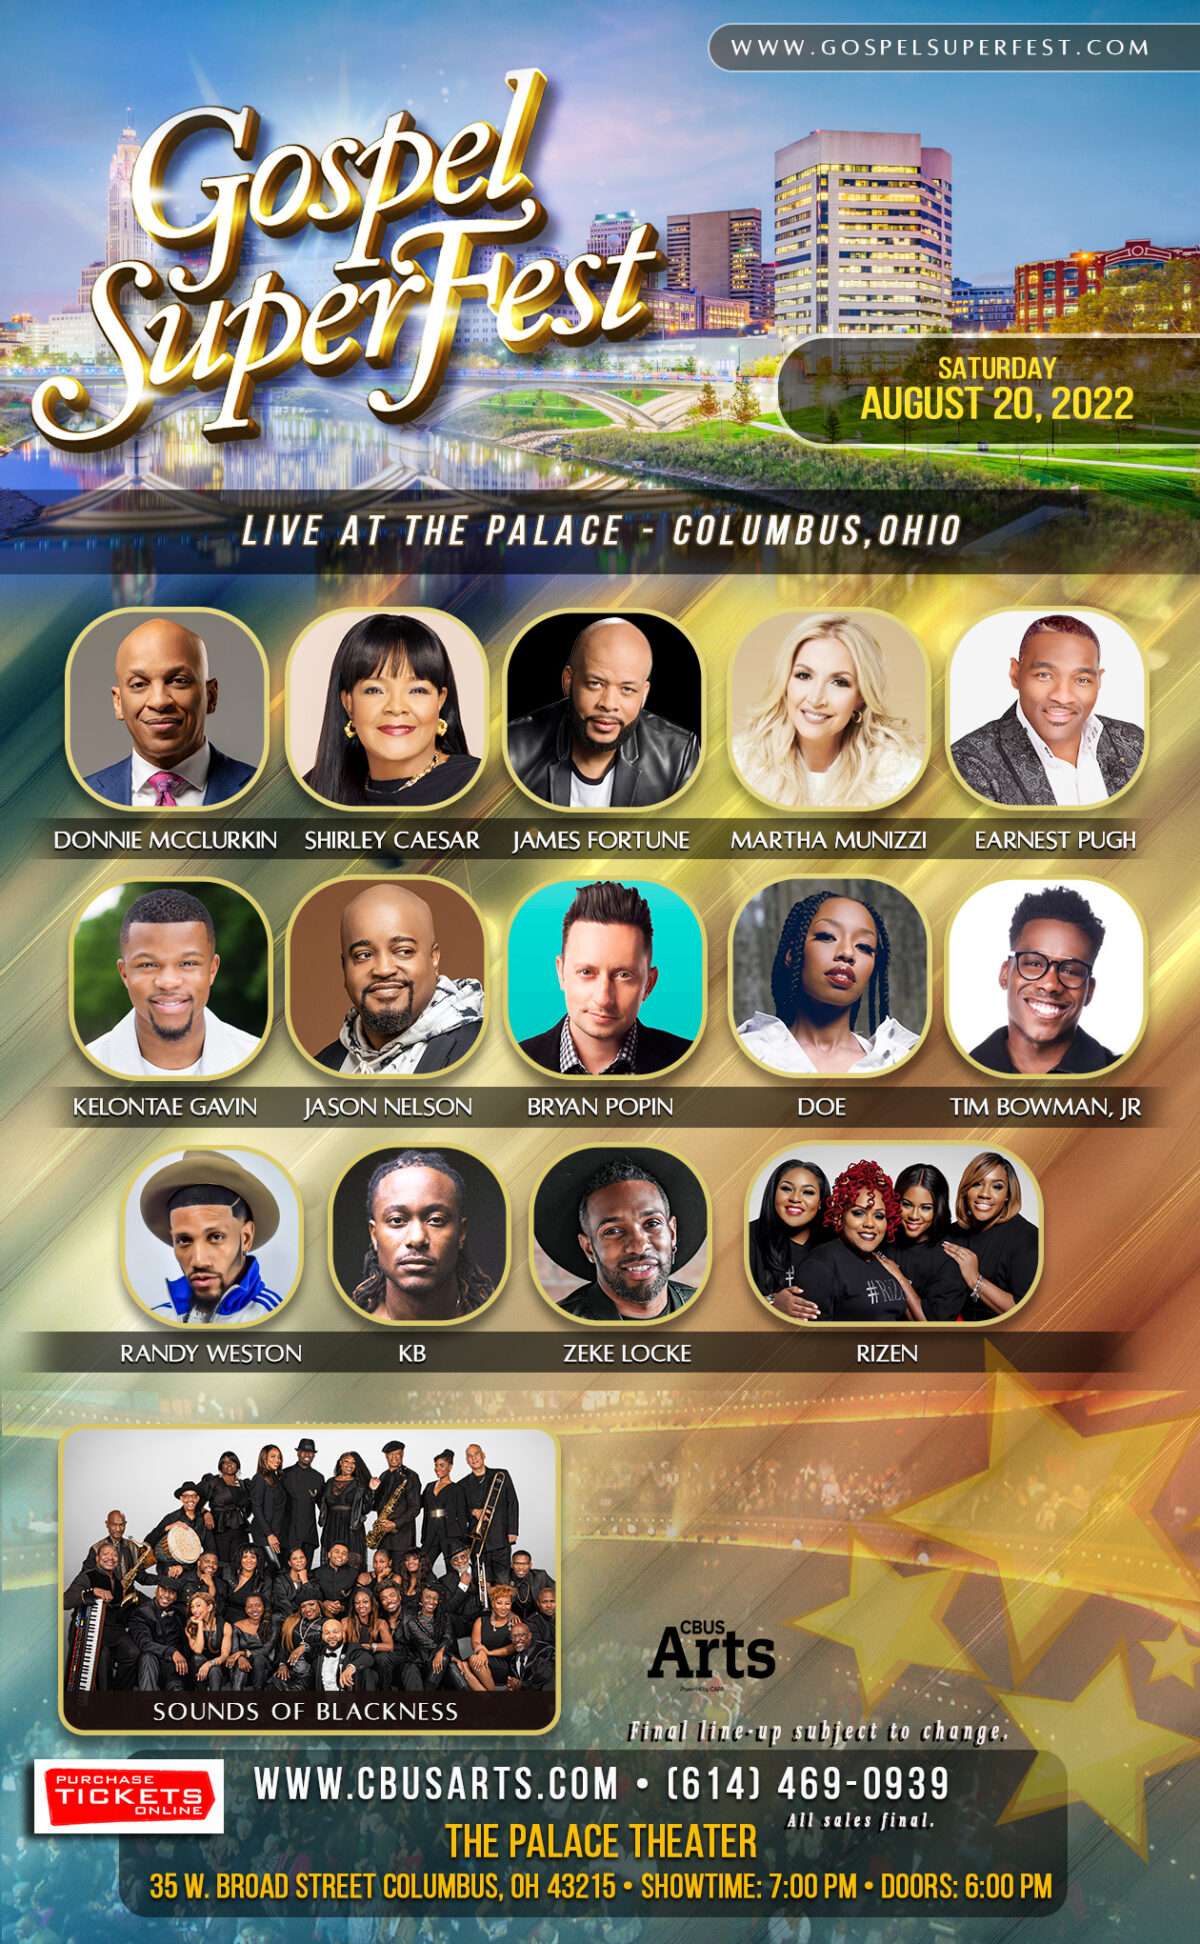 gospel-superfest-producrers-announce-date-and-location-for-next-recording!-columbus,-ohio’s-historic-palace-theater-gets-nod!-donnie-mcclurkin-–-shirley-caesar-–-sounds-of-blackness-–-scheduled-to-appear